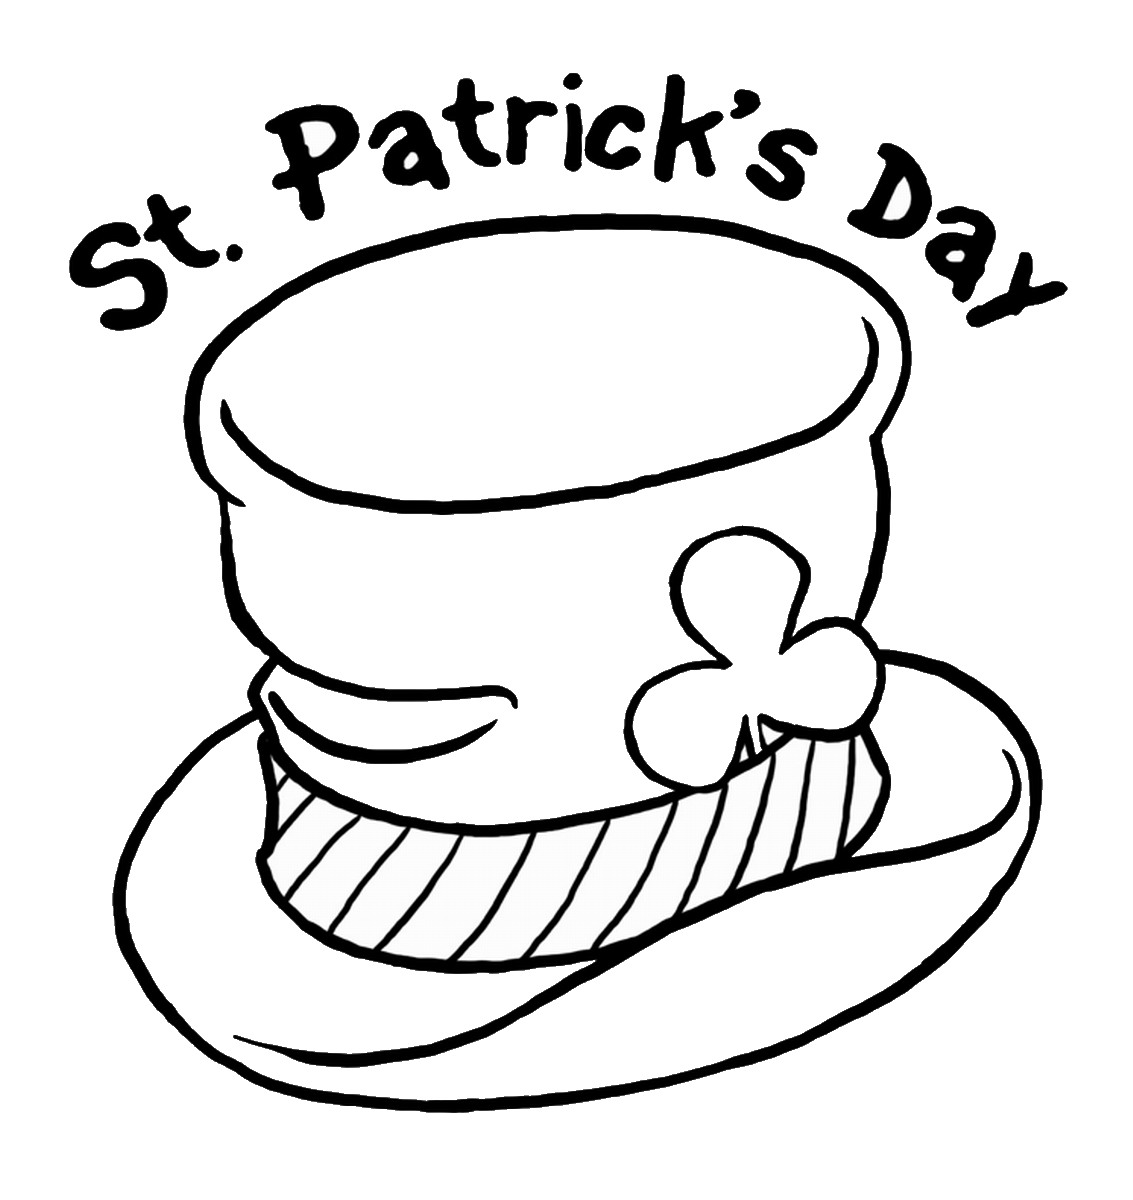 st-patricks-day-coloring-pages-best-coloring-pages-for-kids